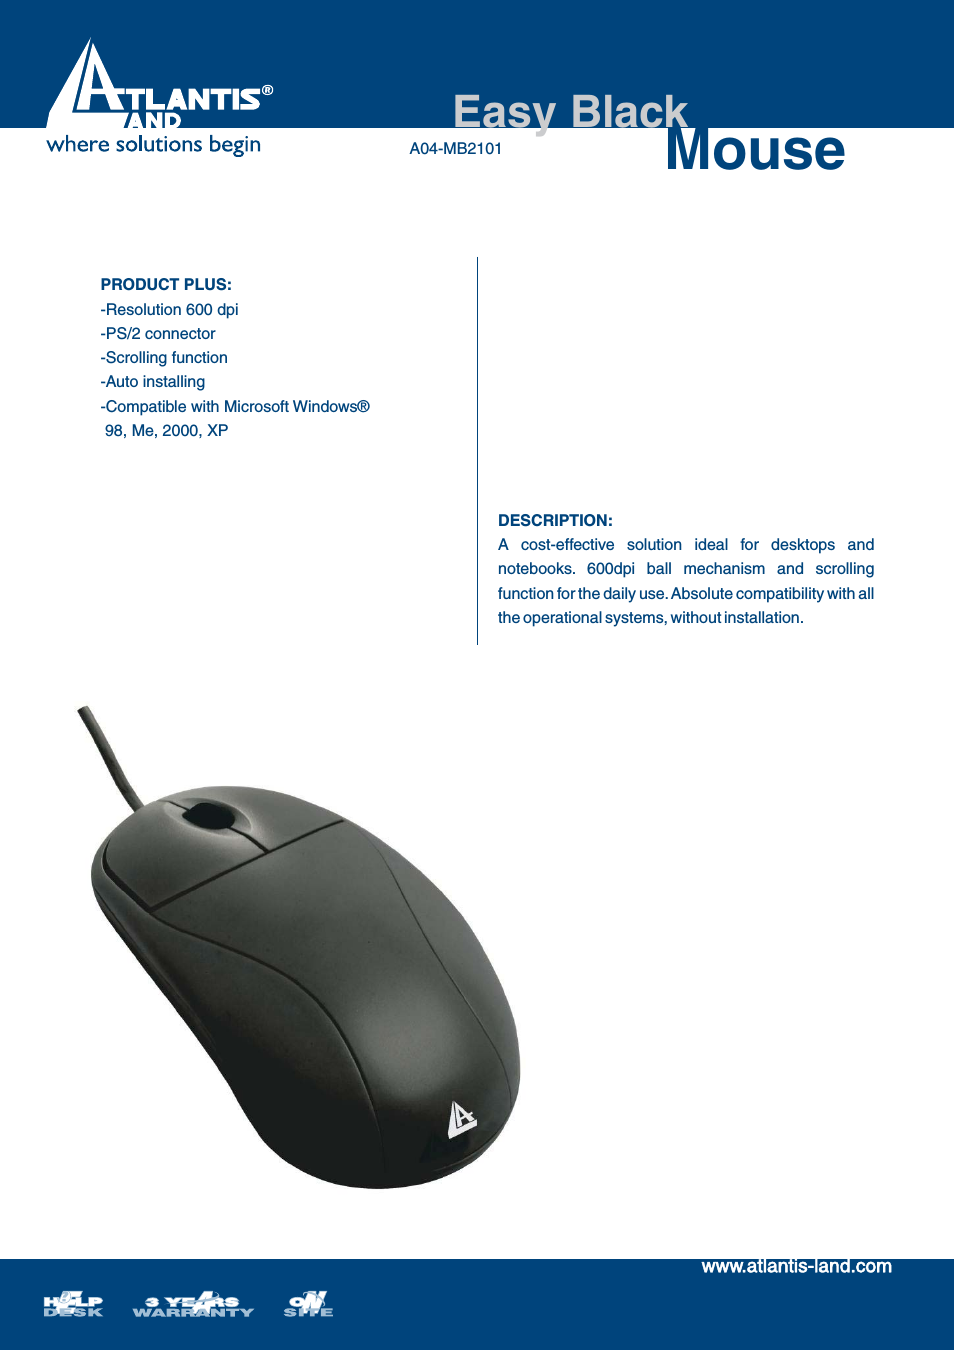 EASY BLACK MOUSE A04-MB2101